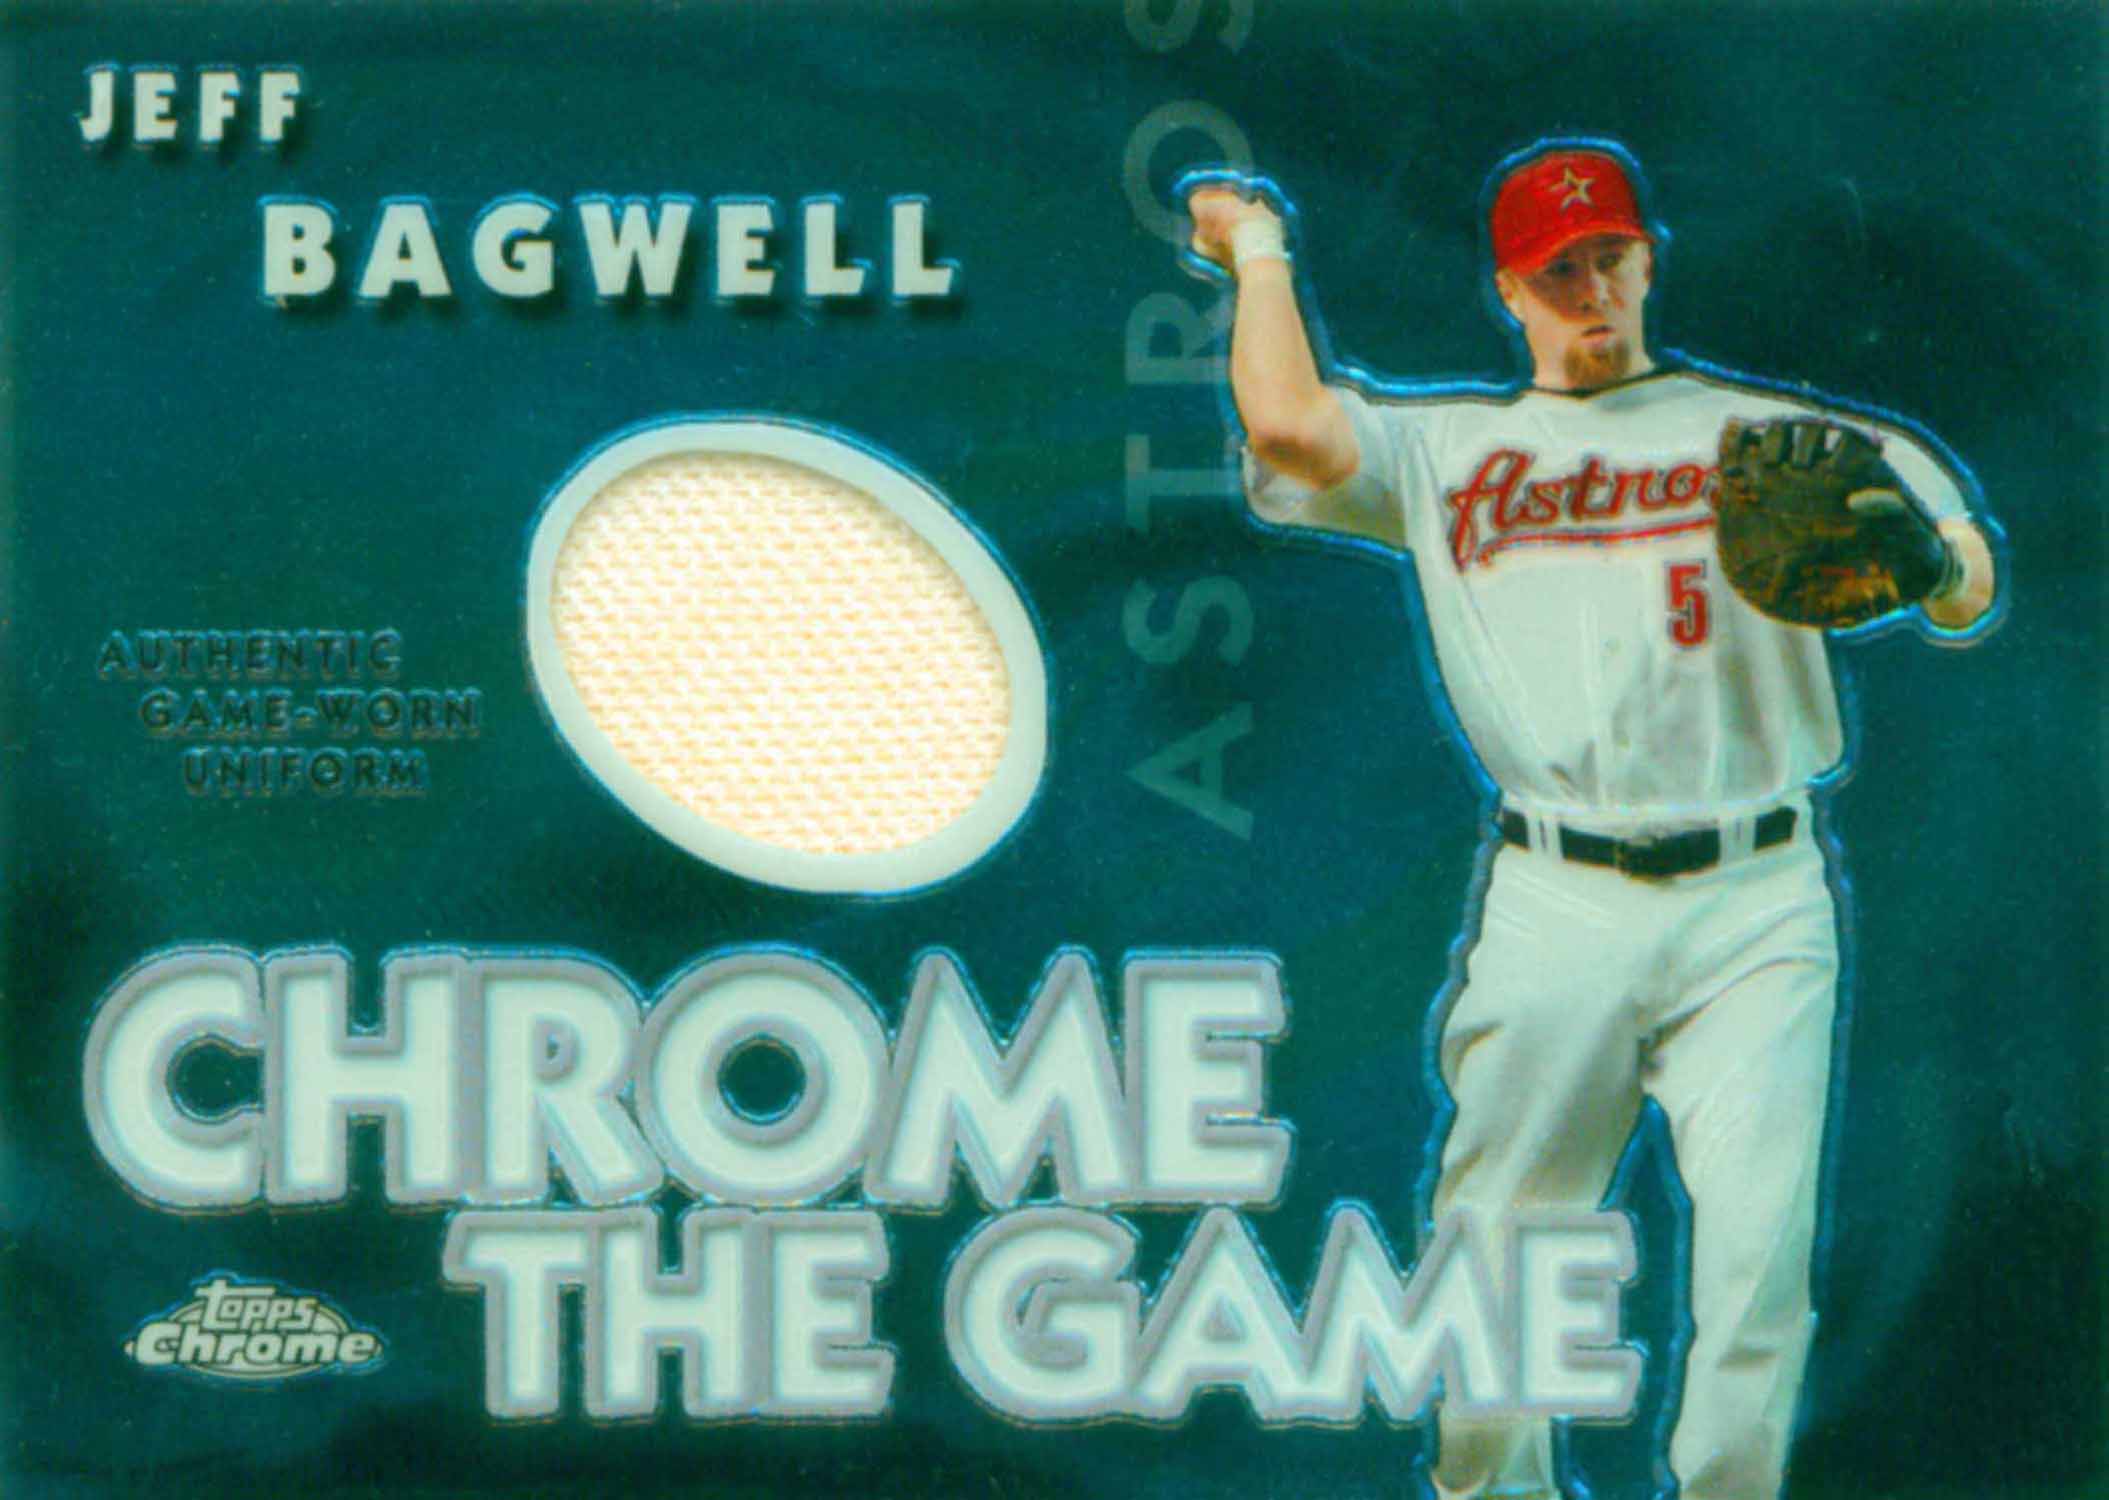 2005 Topps Chrome the Game Relics Uniform